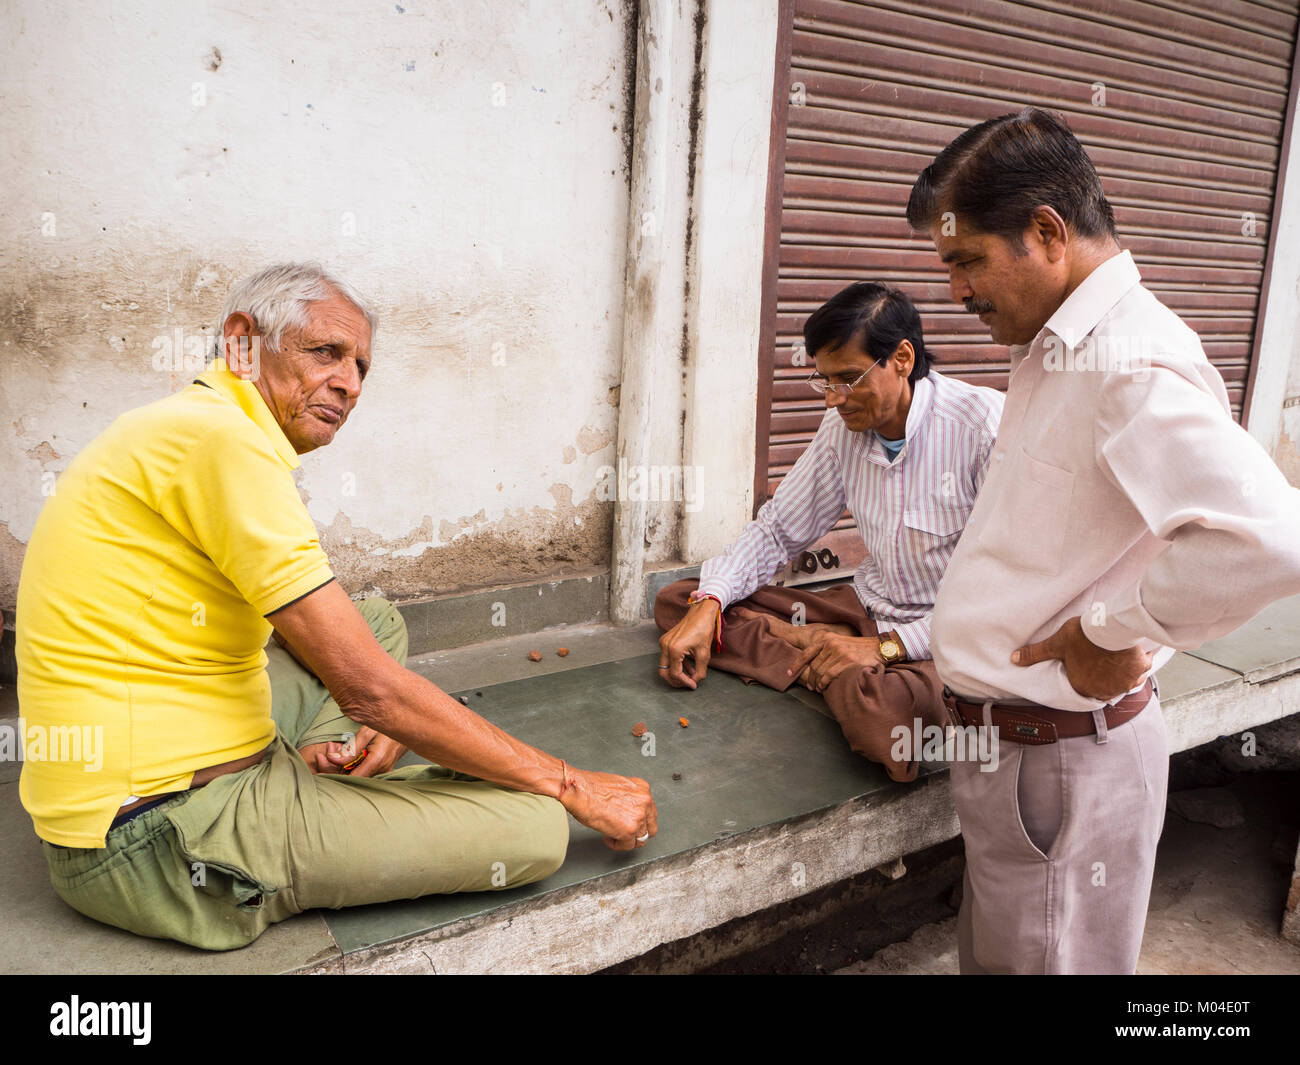 A photo of everyday life in the city - three nice Indian men who spend time together playing traditional street game in Rajasthan India Stock Photo